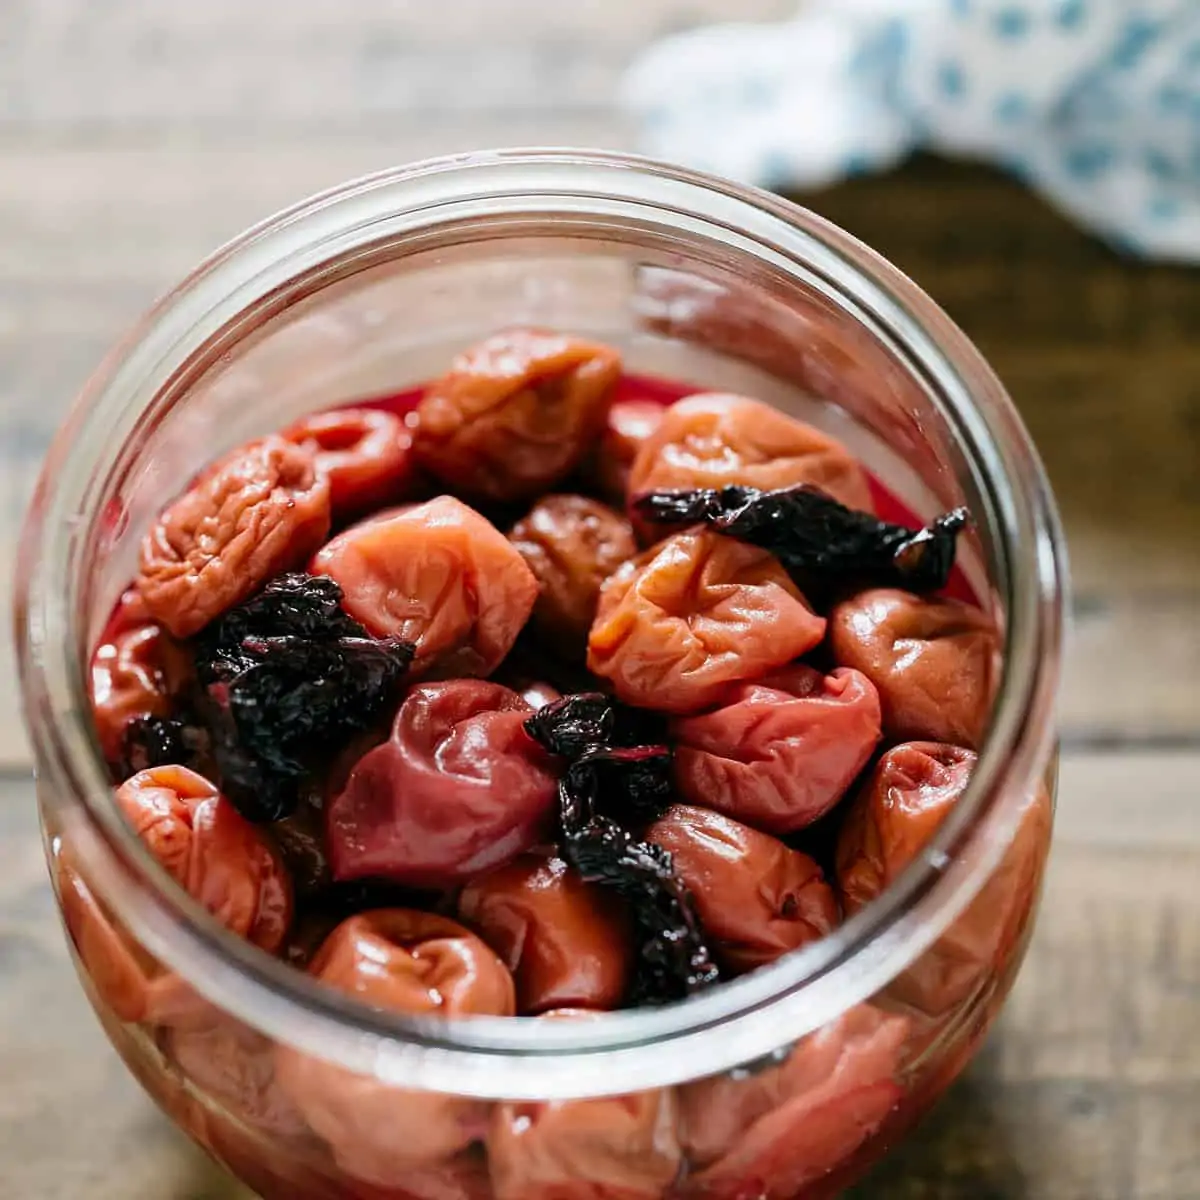 Pickled umeboshi plums in a glass preserve jar